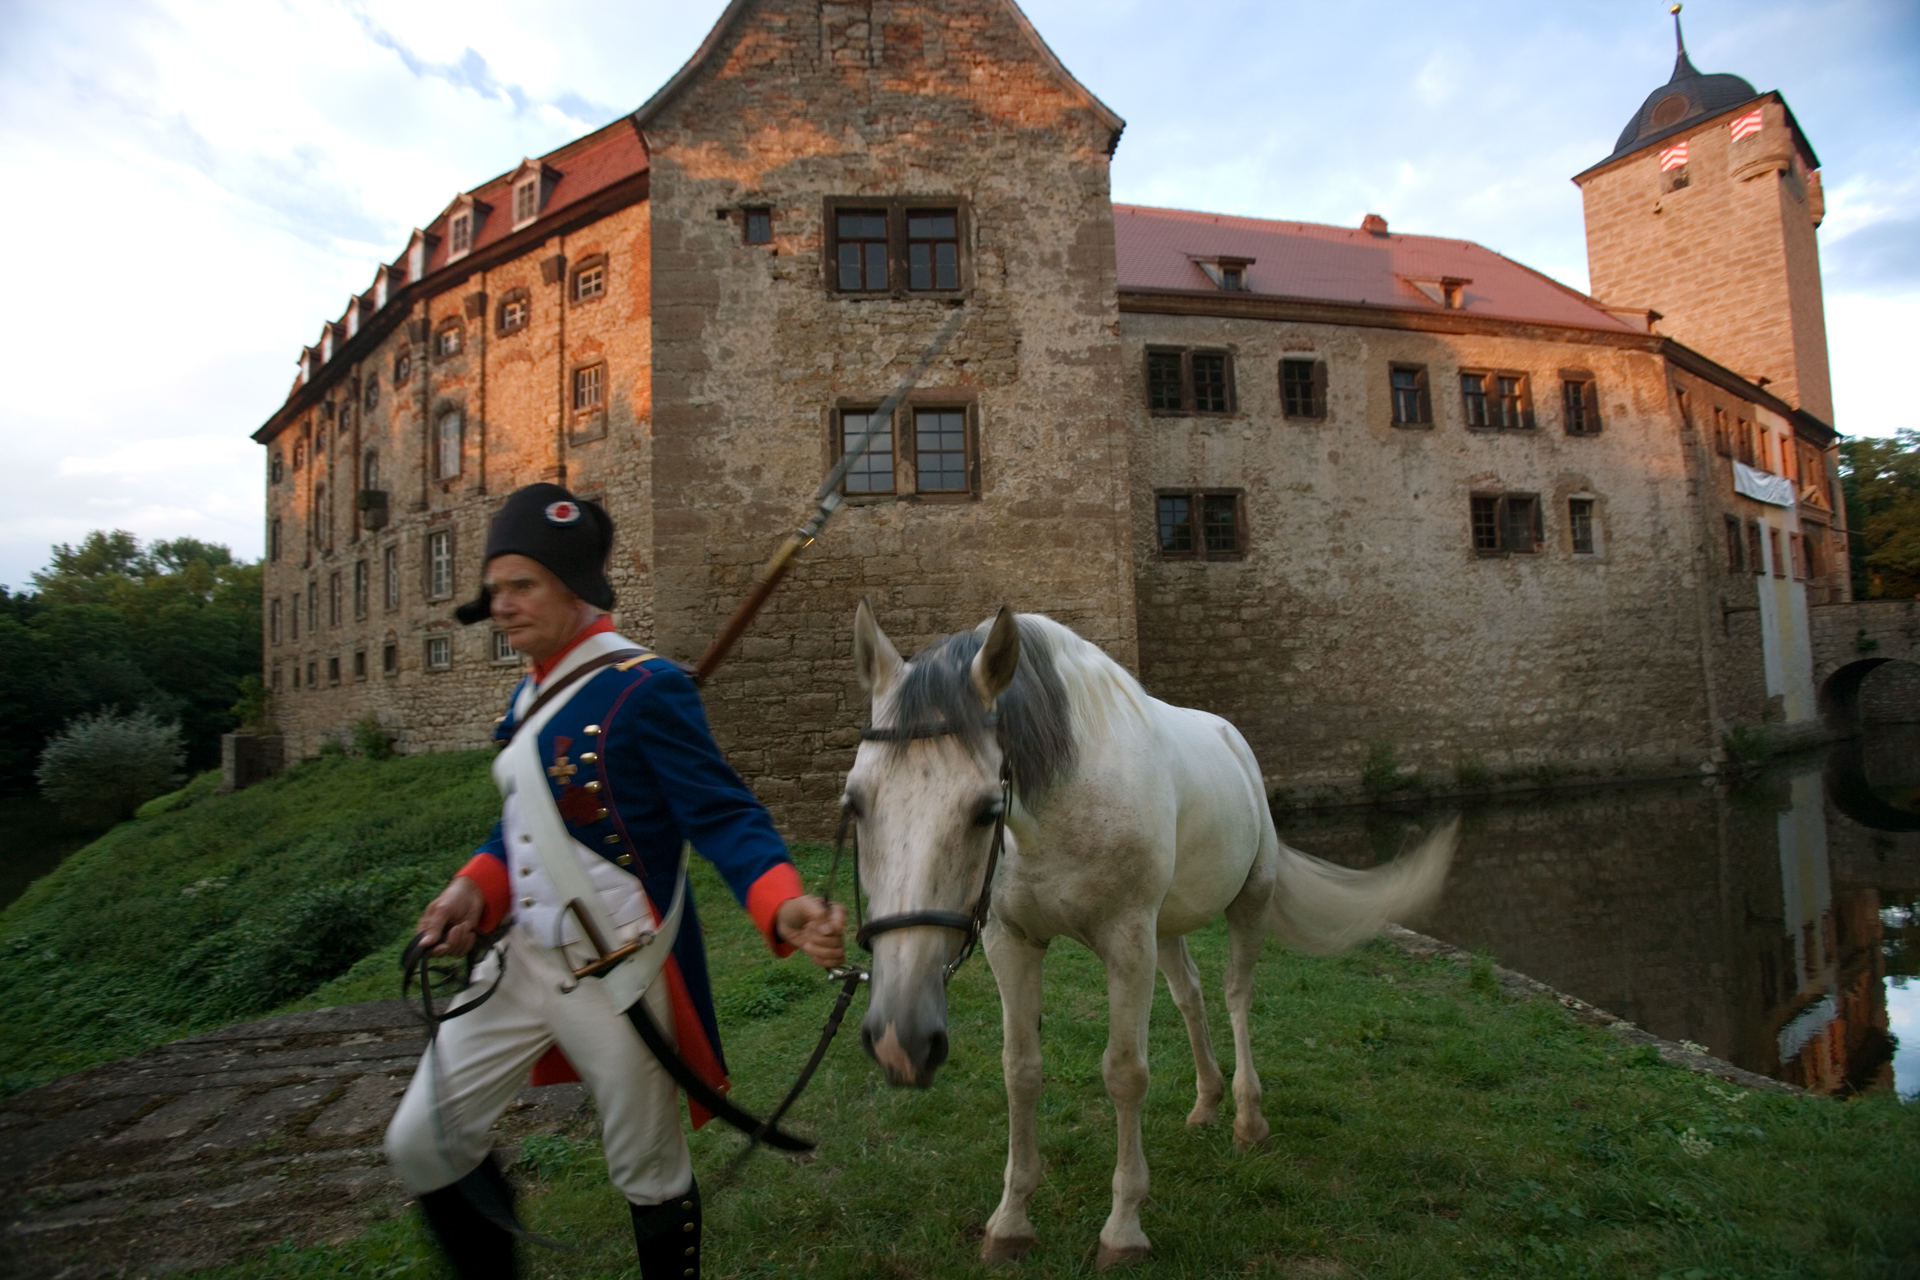  Schloss Kapellendorf, an important strategic fortress during the Battle of Jena and Auerstedt now provides a backdrop for historic re-enactments.  Krippendorf, Germany  